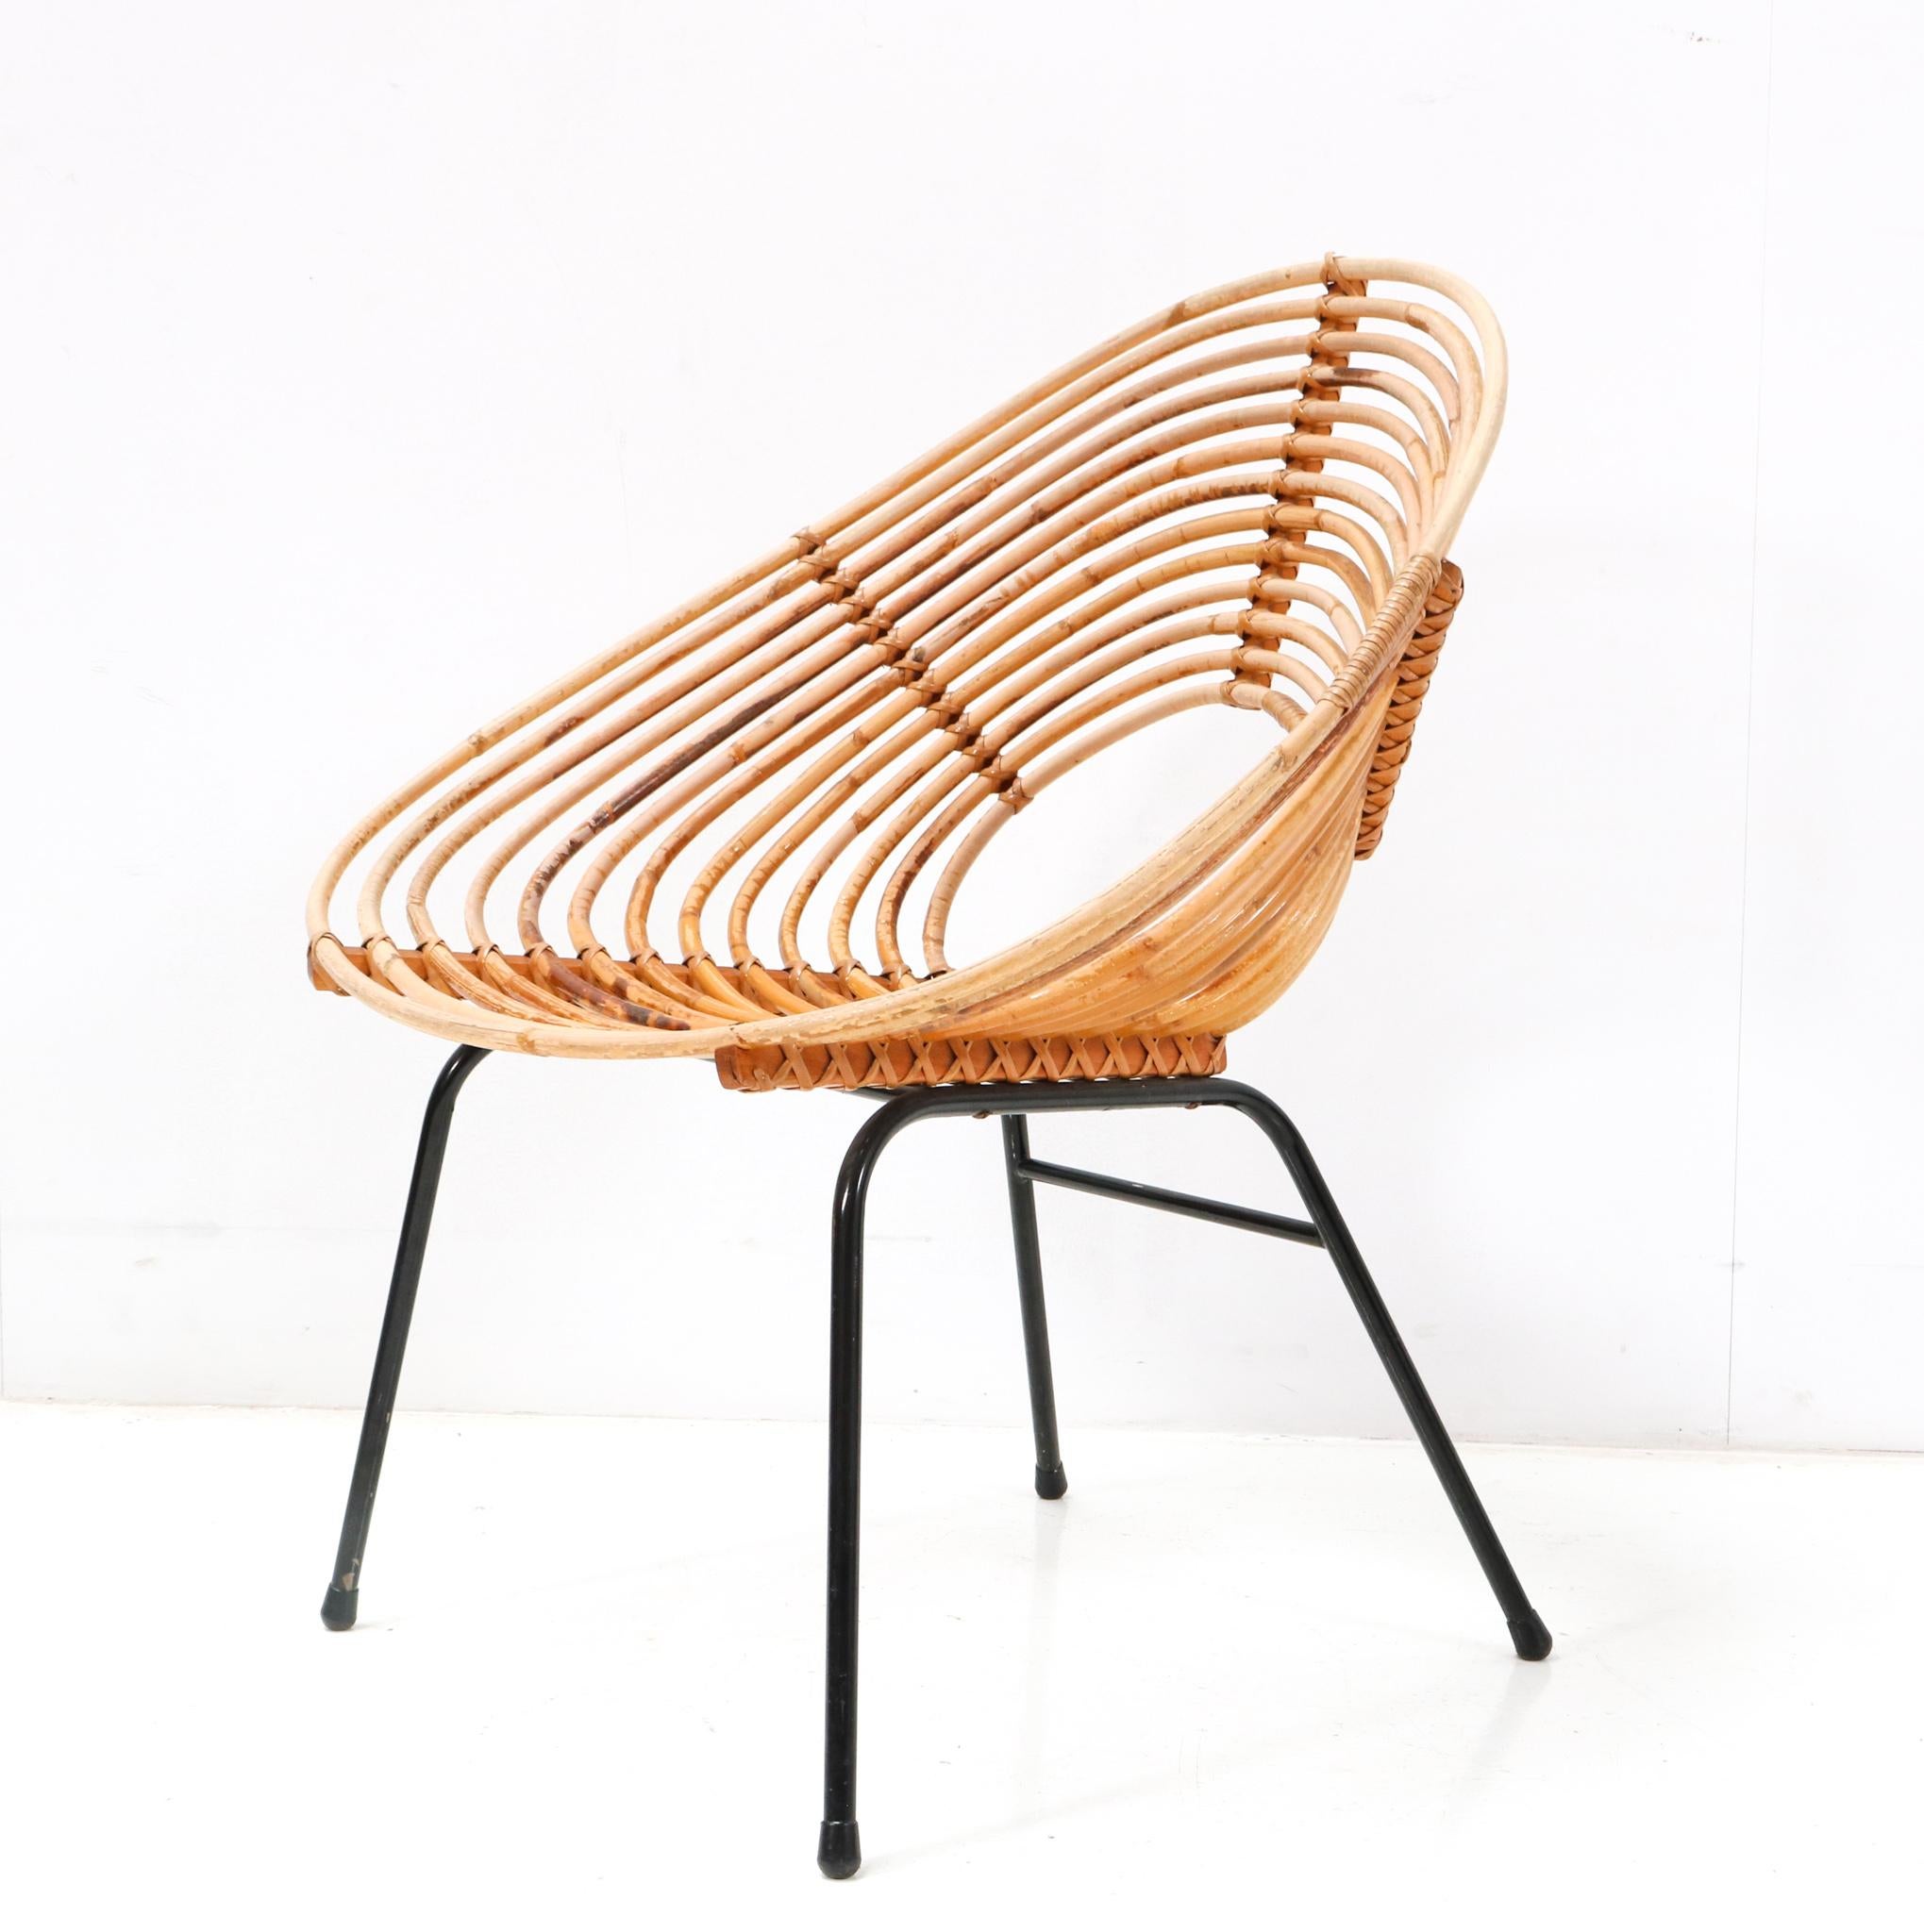 Dutch Rattan Mid-Century Modern Lounge Chair by Dirk van Sliedregt for Rohe, 1950s For Sale